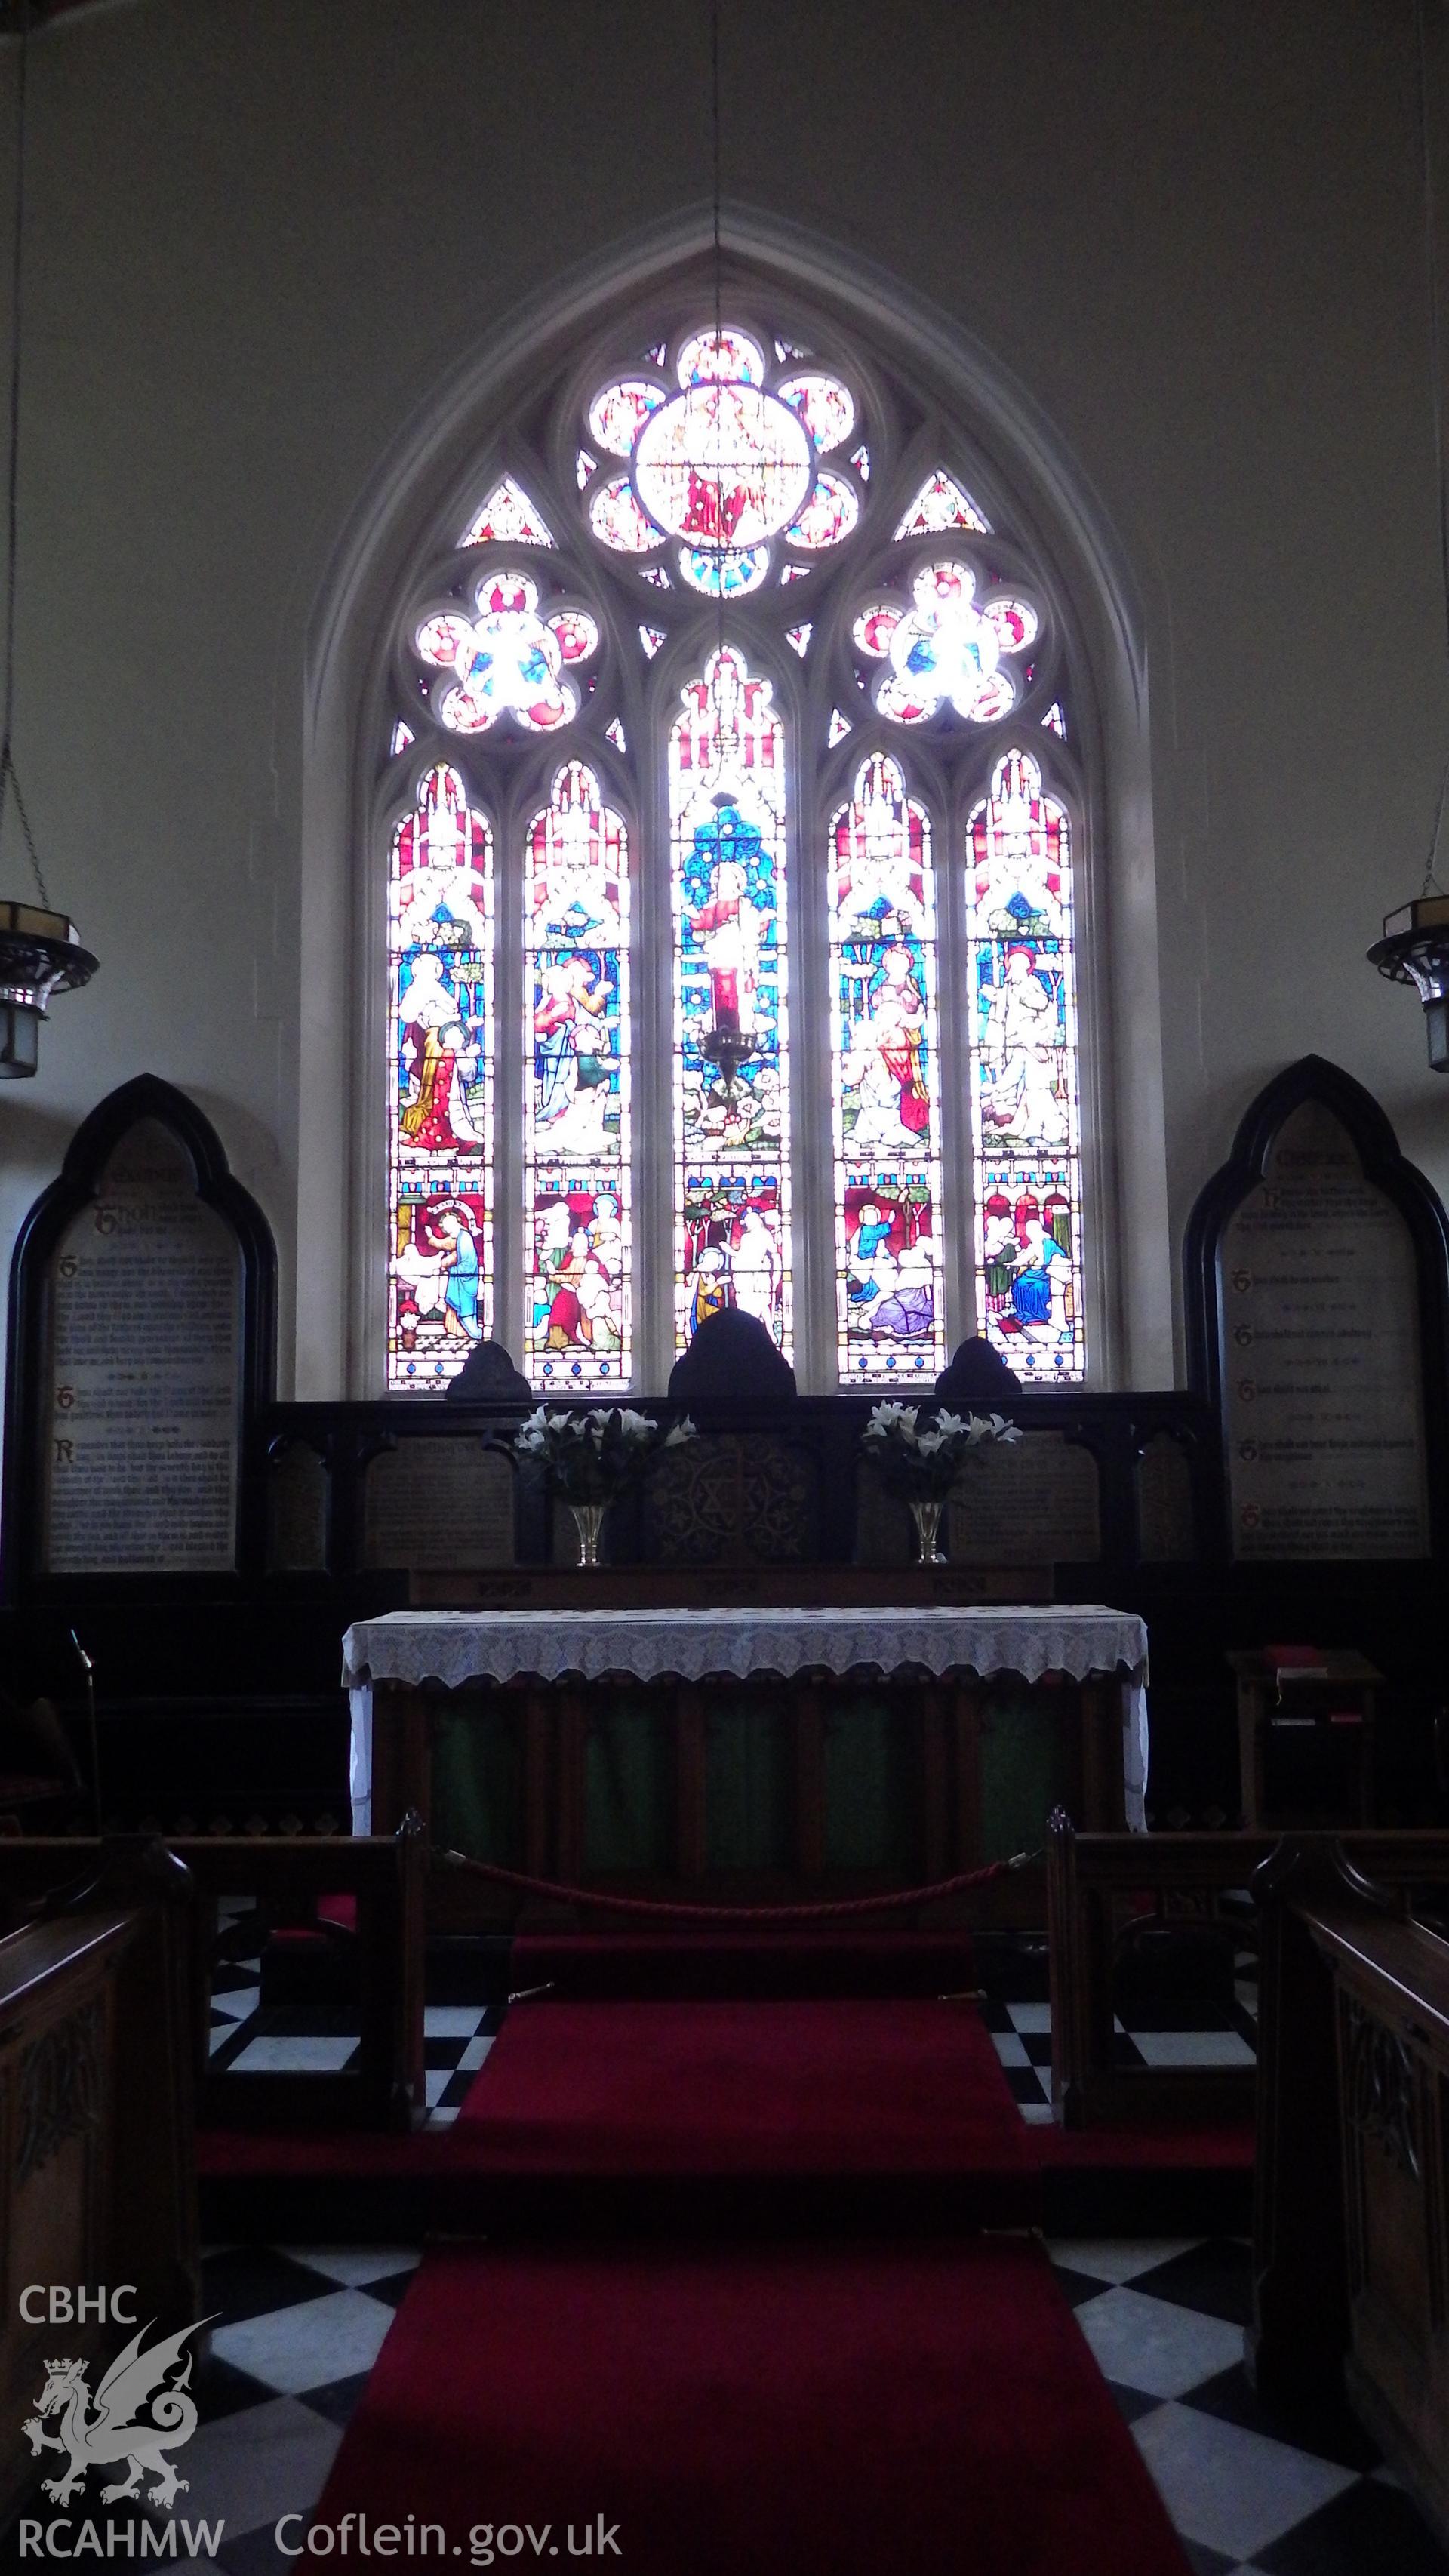 Altar and stained glass window, with prayer/bible verse boards